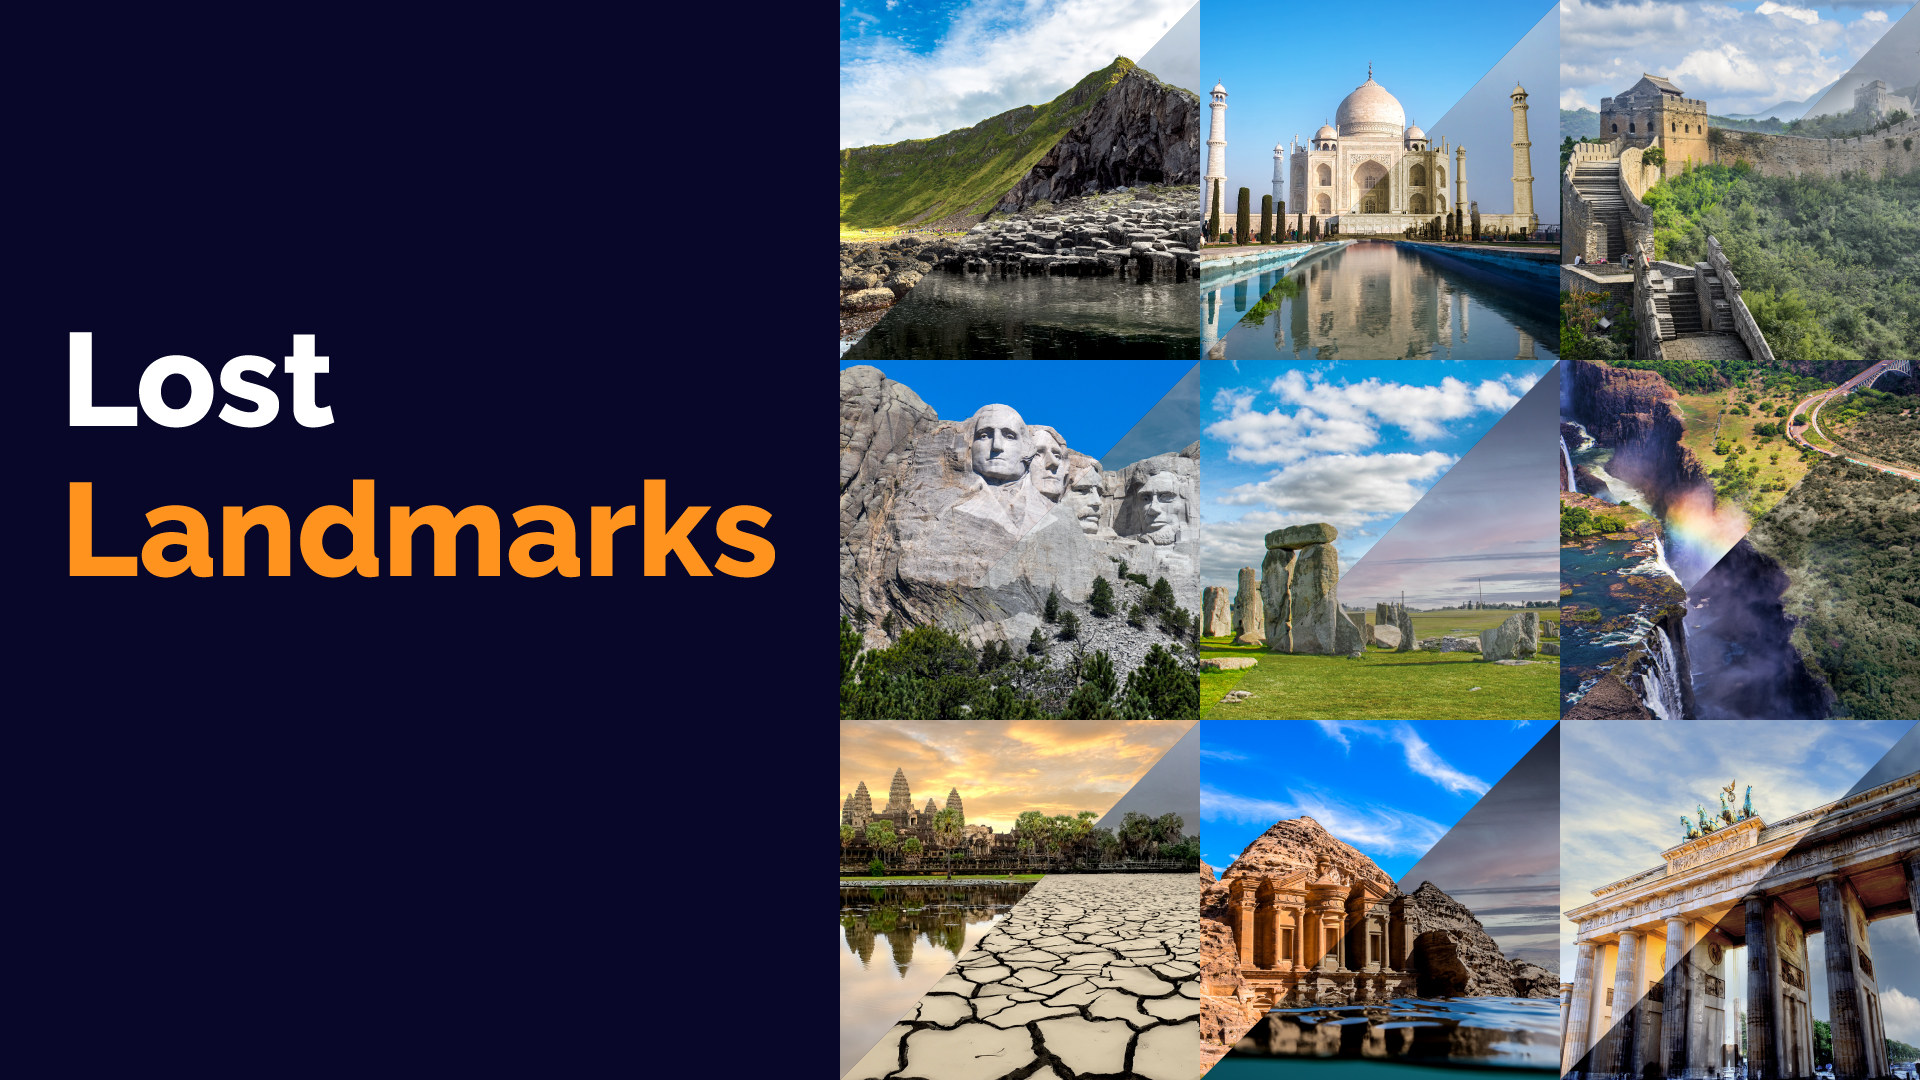 British start-up has used generative AI tool Midjourney to generate images showing how climate change could affect the world’s most well-known monuments. Photo: Handout